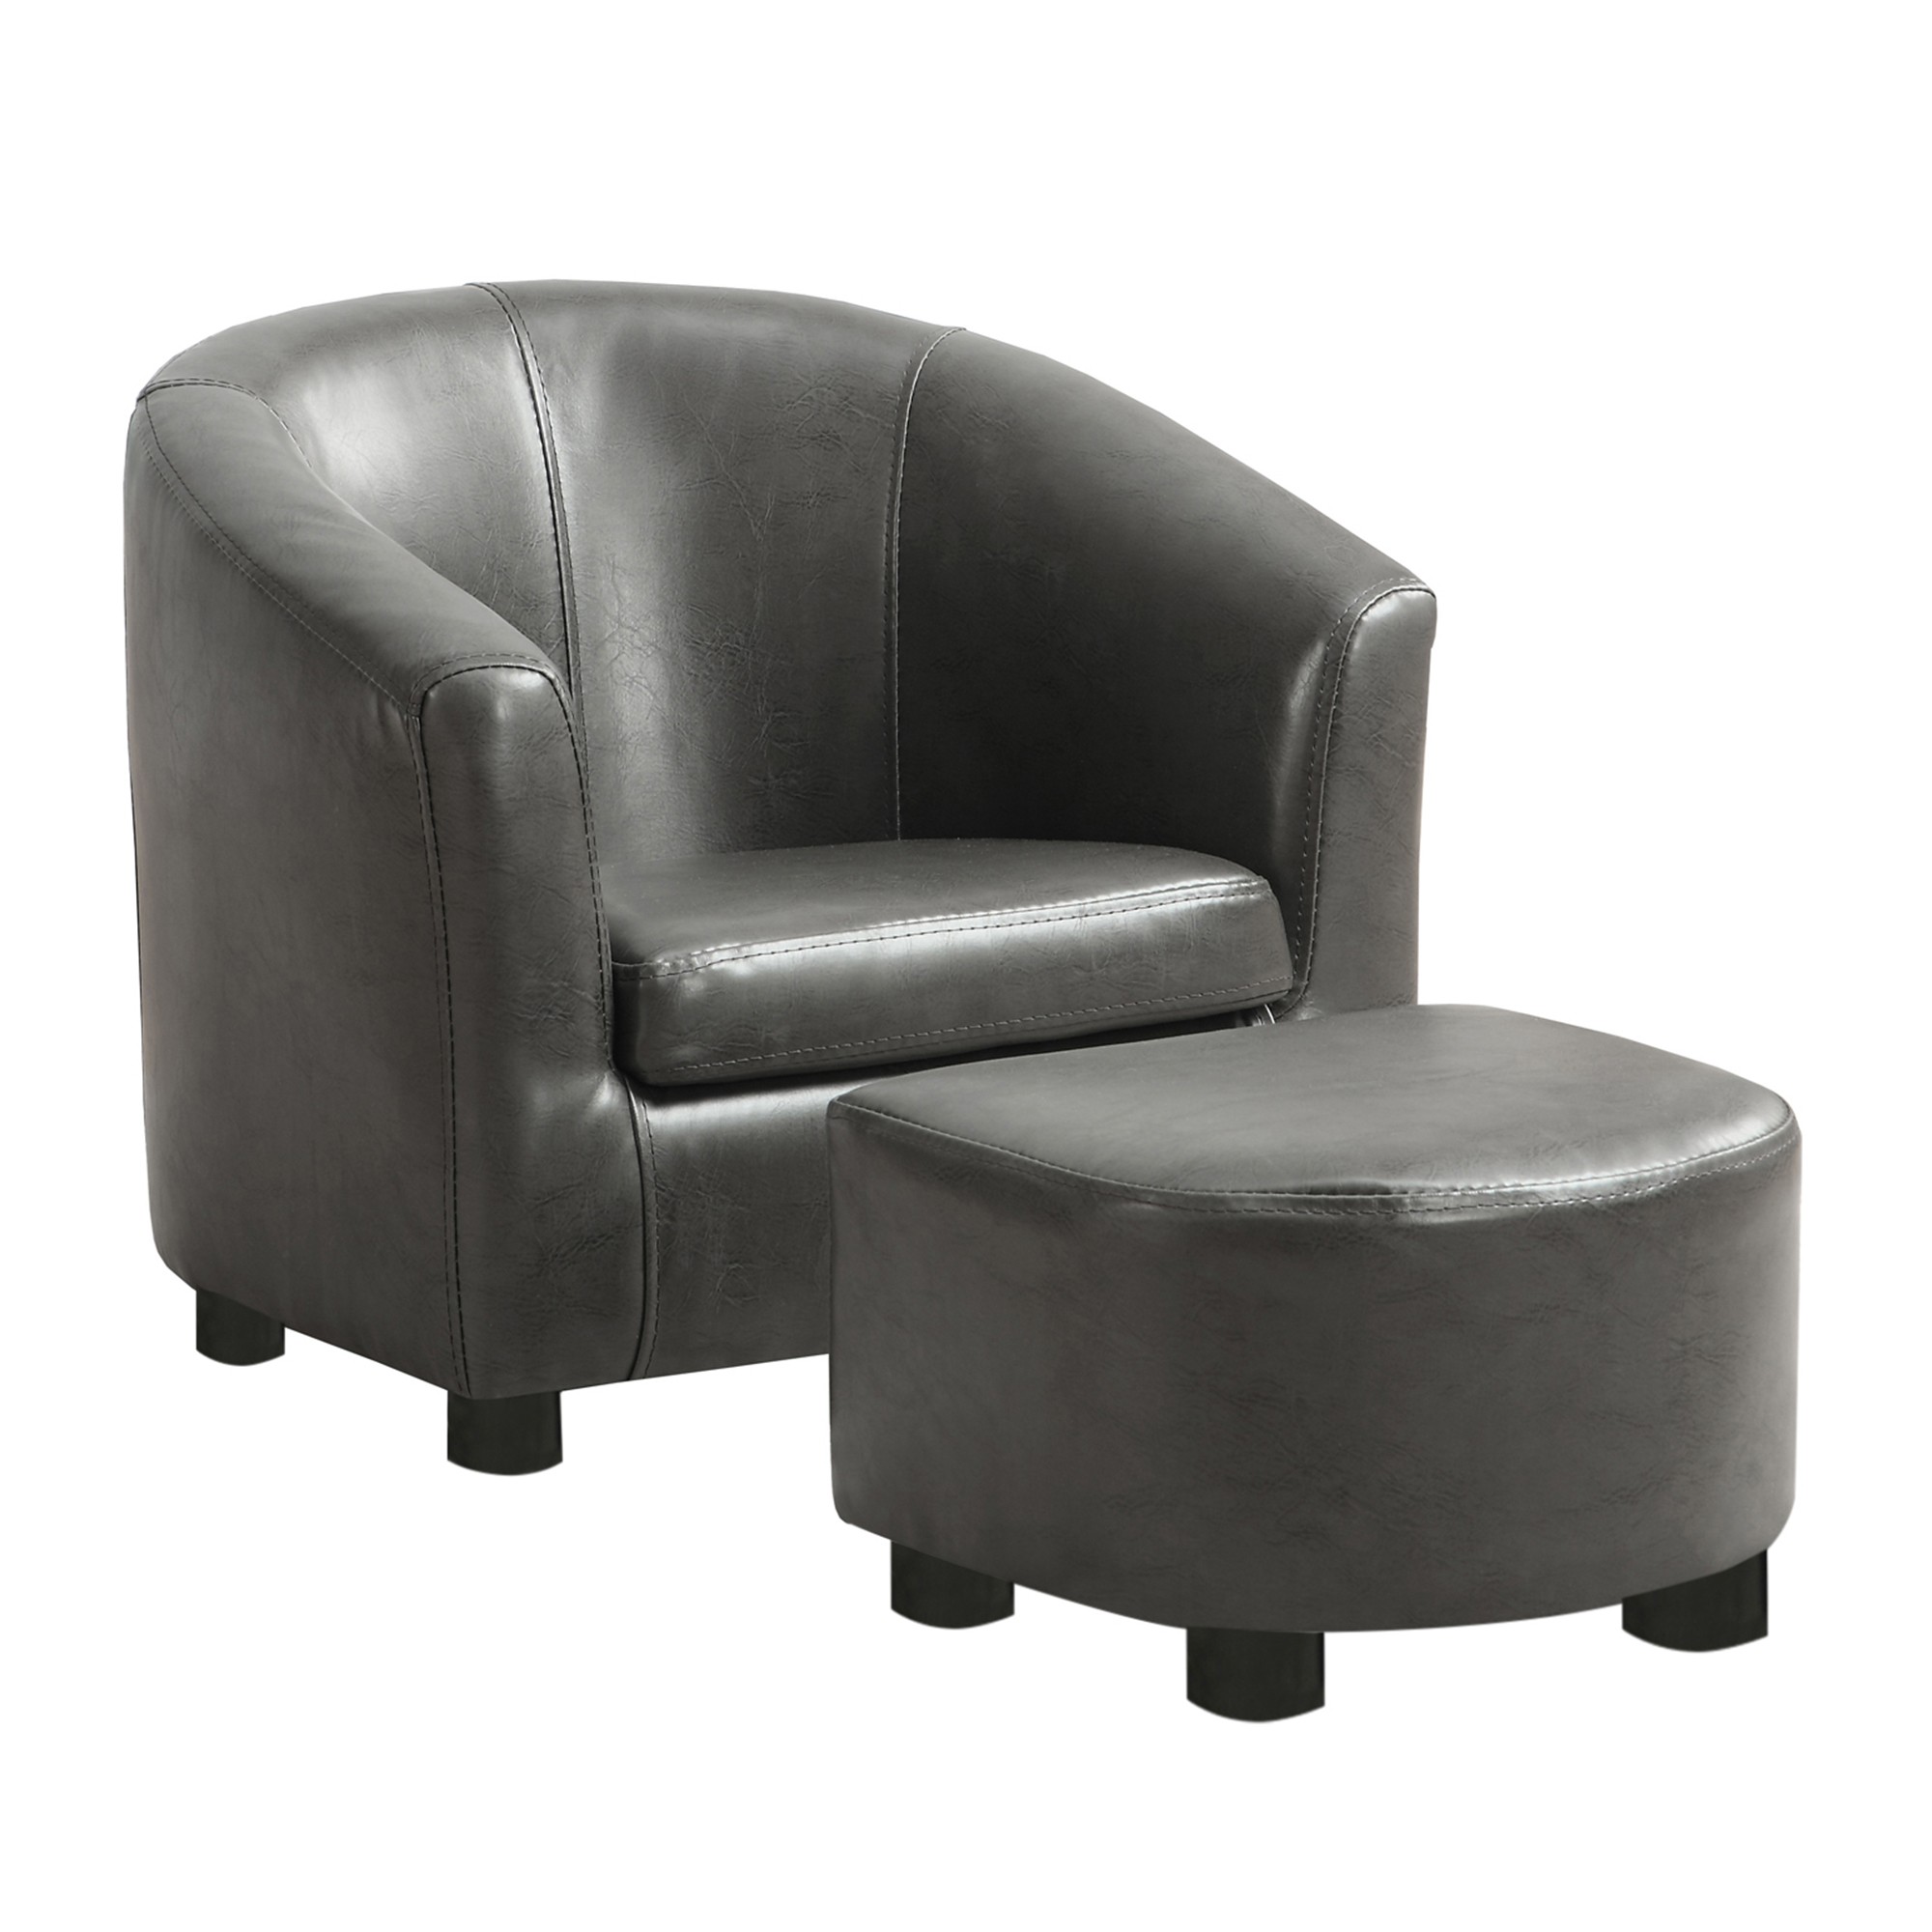 30.5" x 33" x 26" Charcoal Grey Leather Look Chair Set of 2